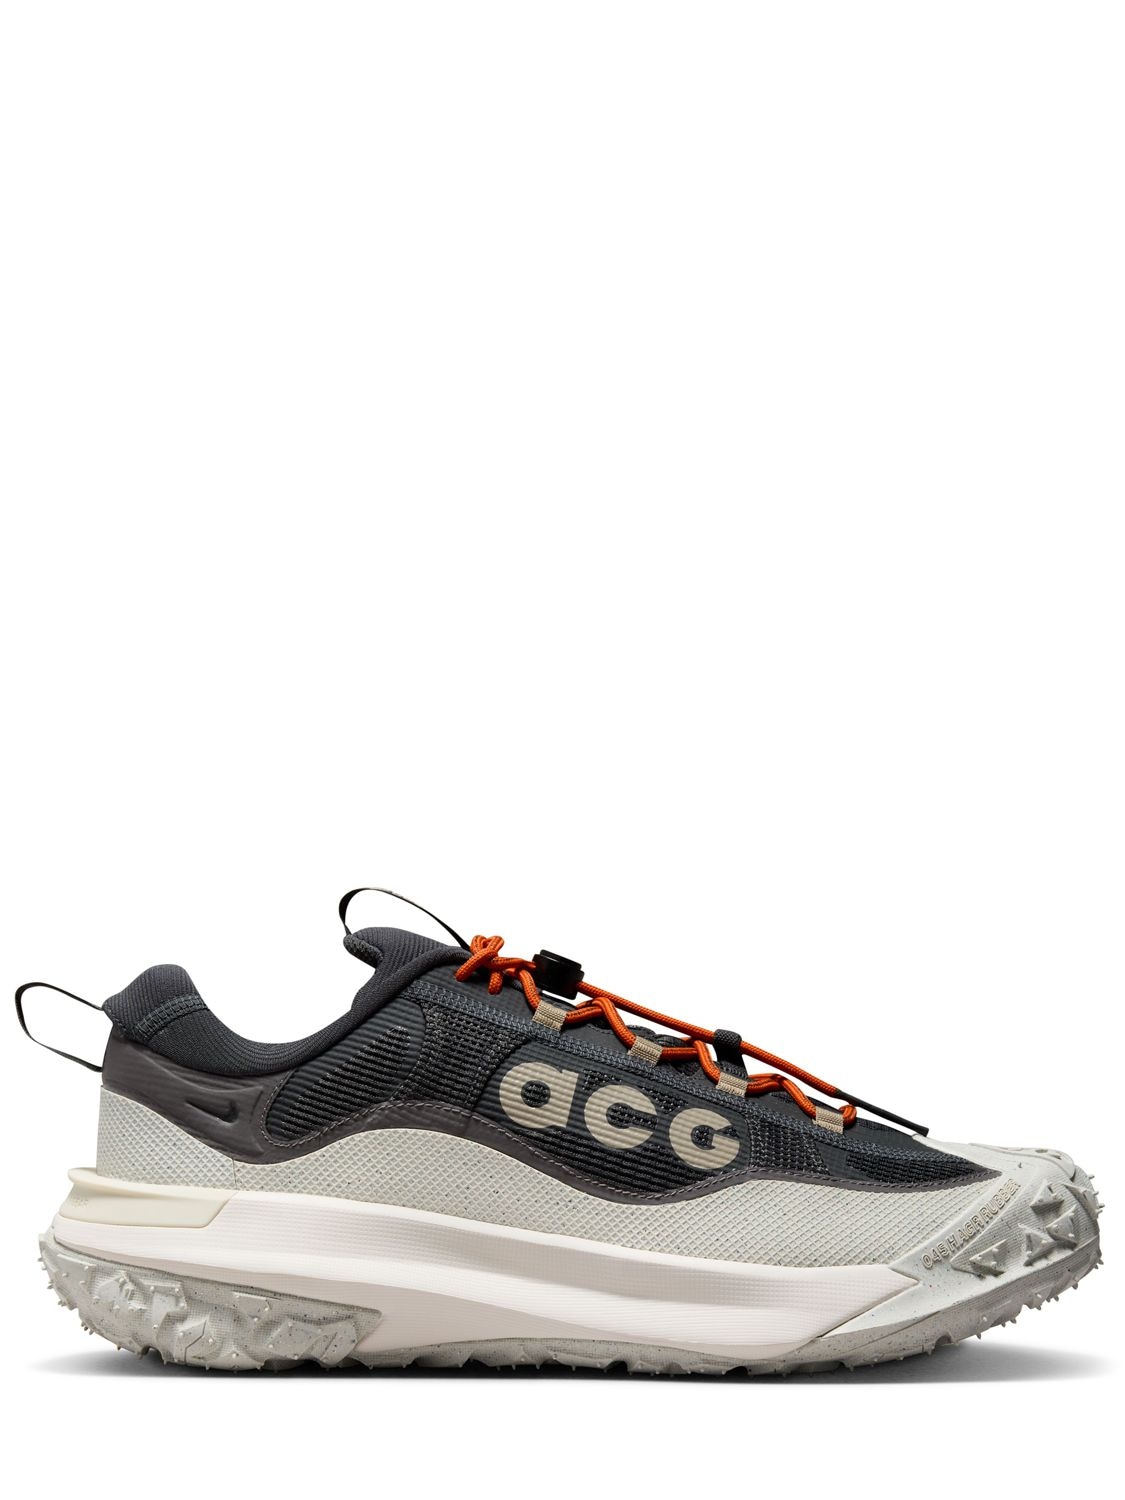 Image of Acg Mountain Fly 2 Low Gtx Sneakers